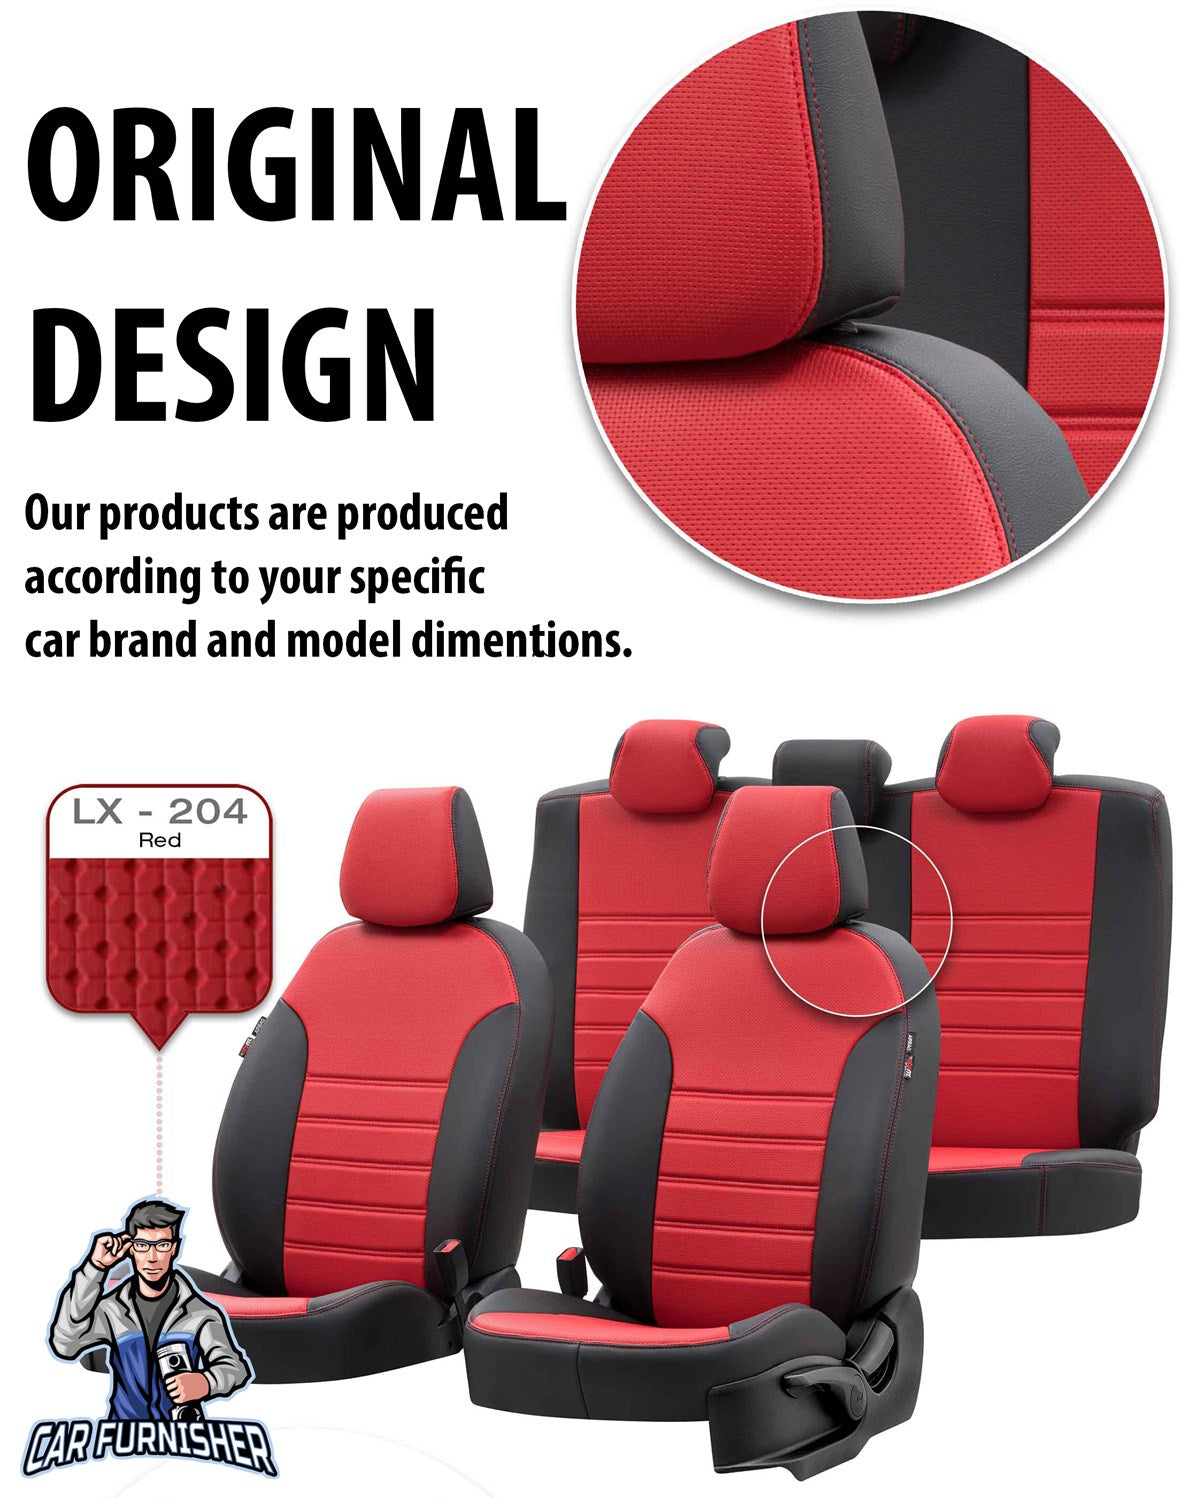 Volkswagen Amarok Seat Cover New York Leather Design Red Leather